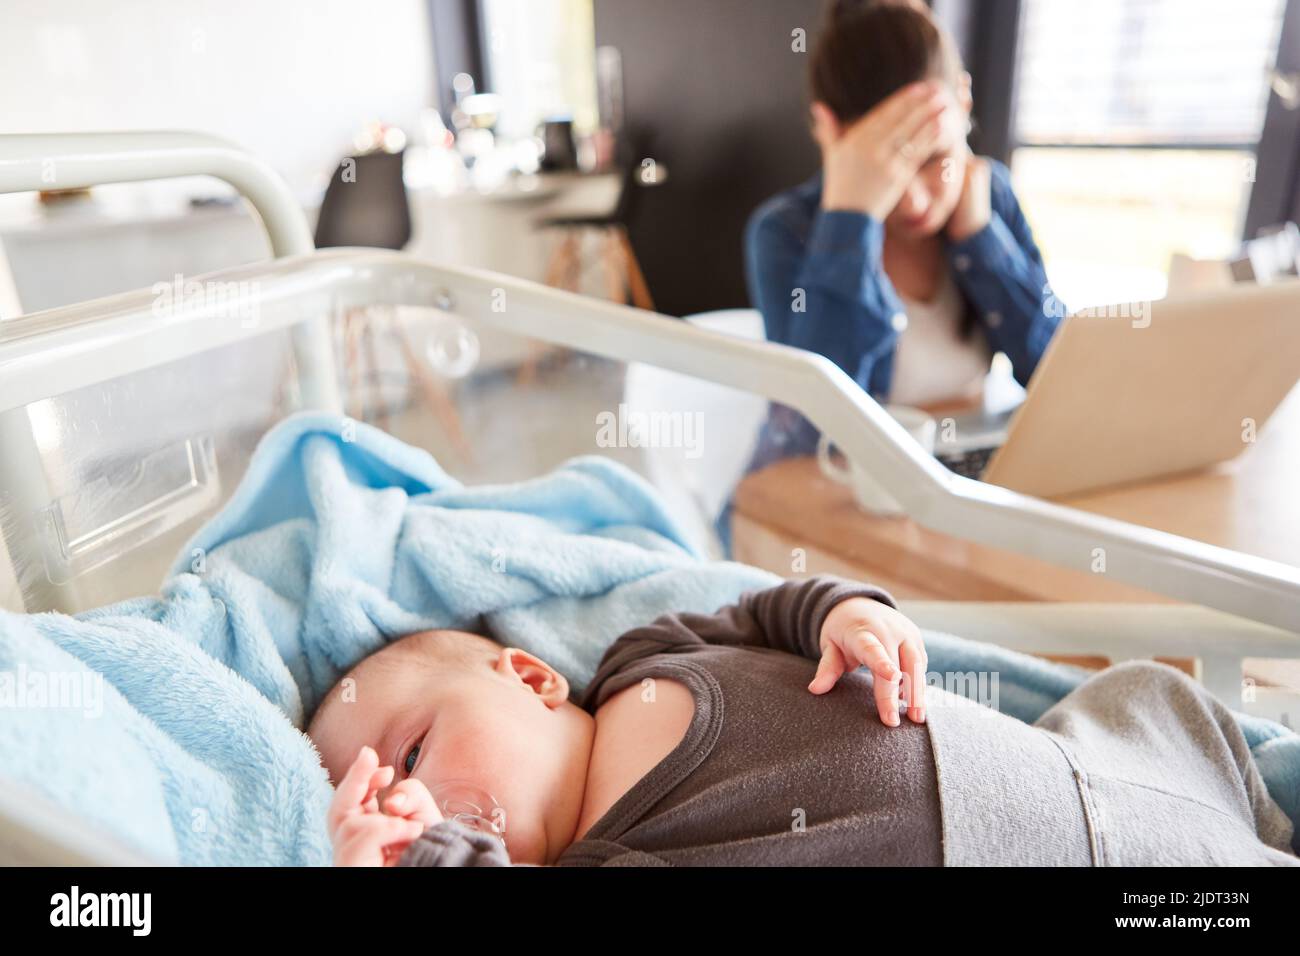 Sleeping baby in cot and exhausted single mother at pc in background Stock Photo